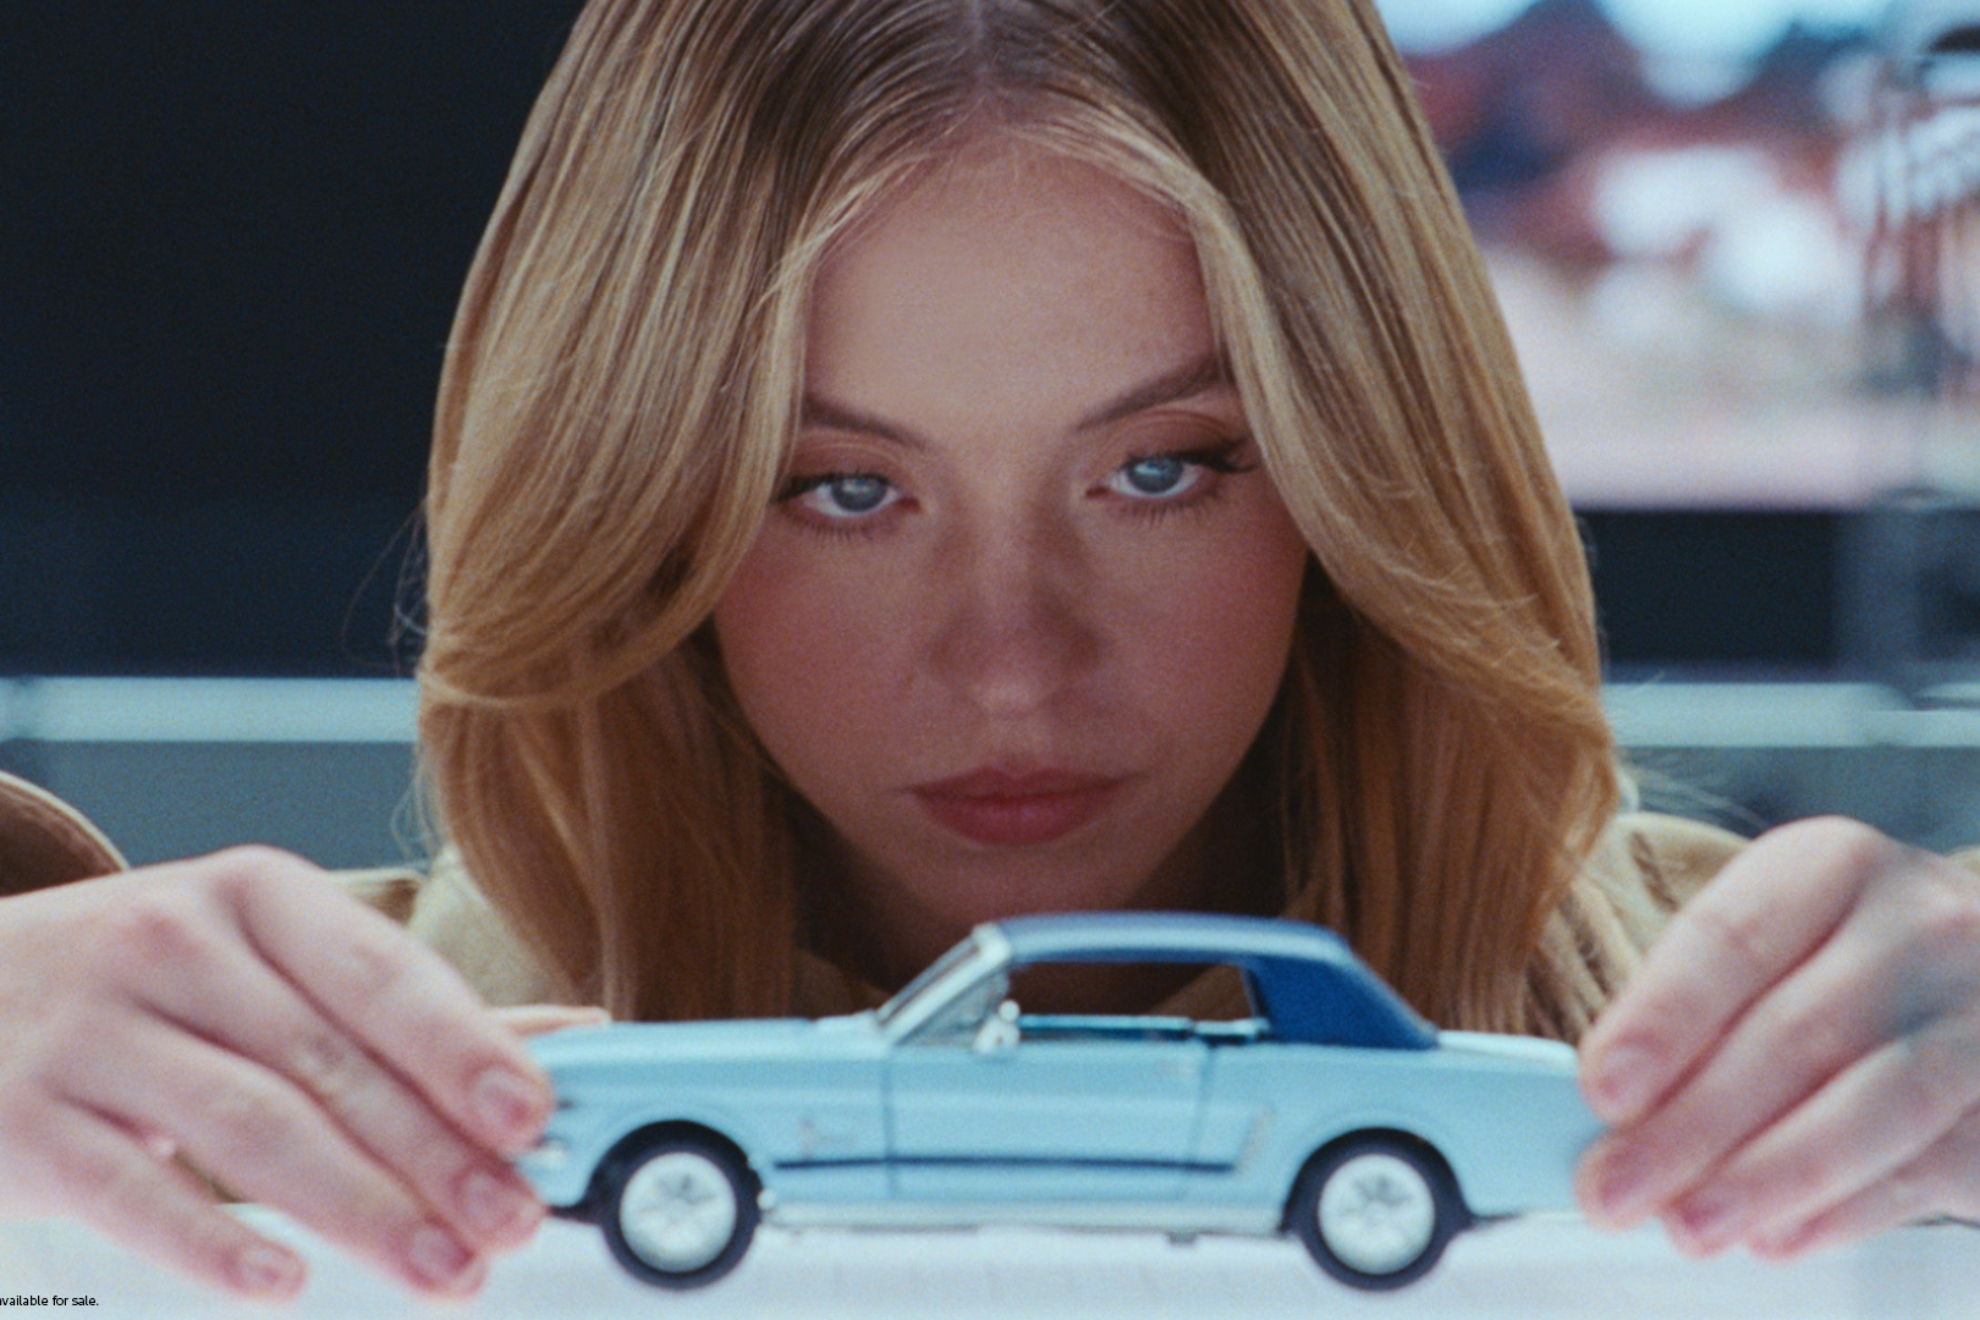 Sydney Sweeney makes waves by claiming she has the 'best t*ts in